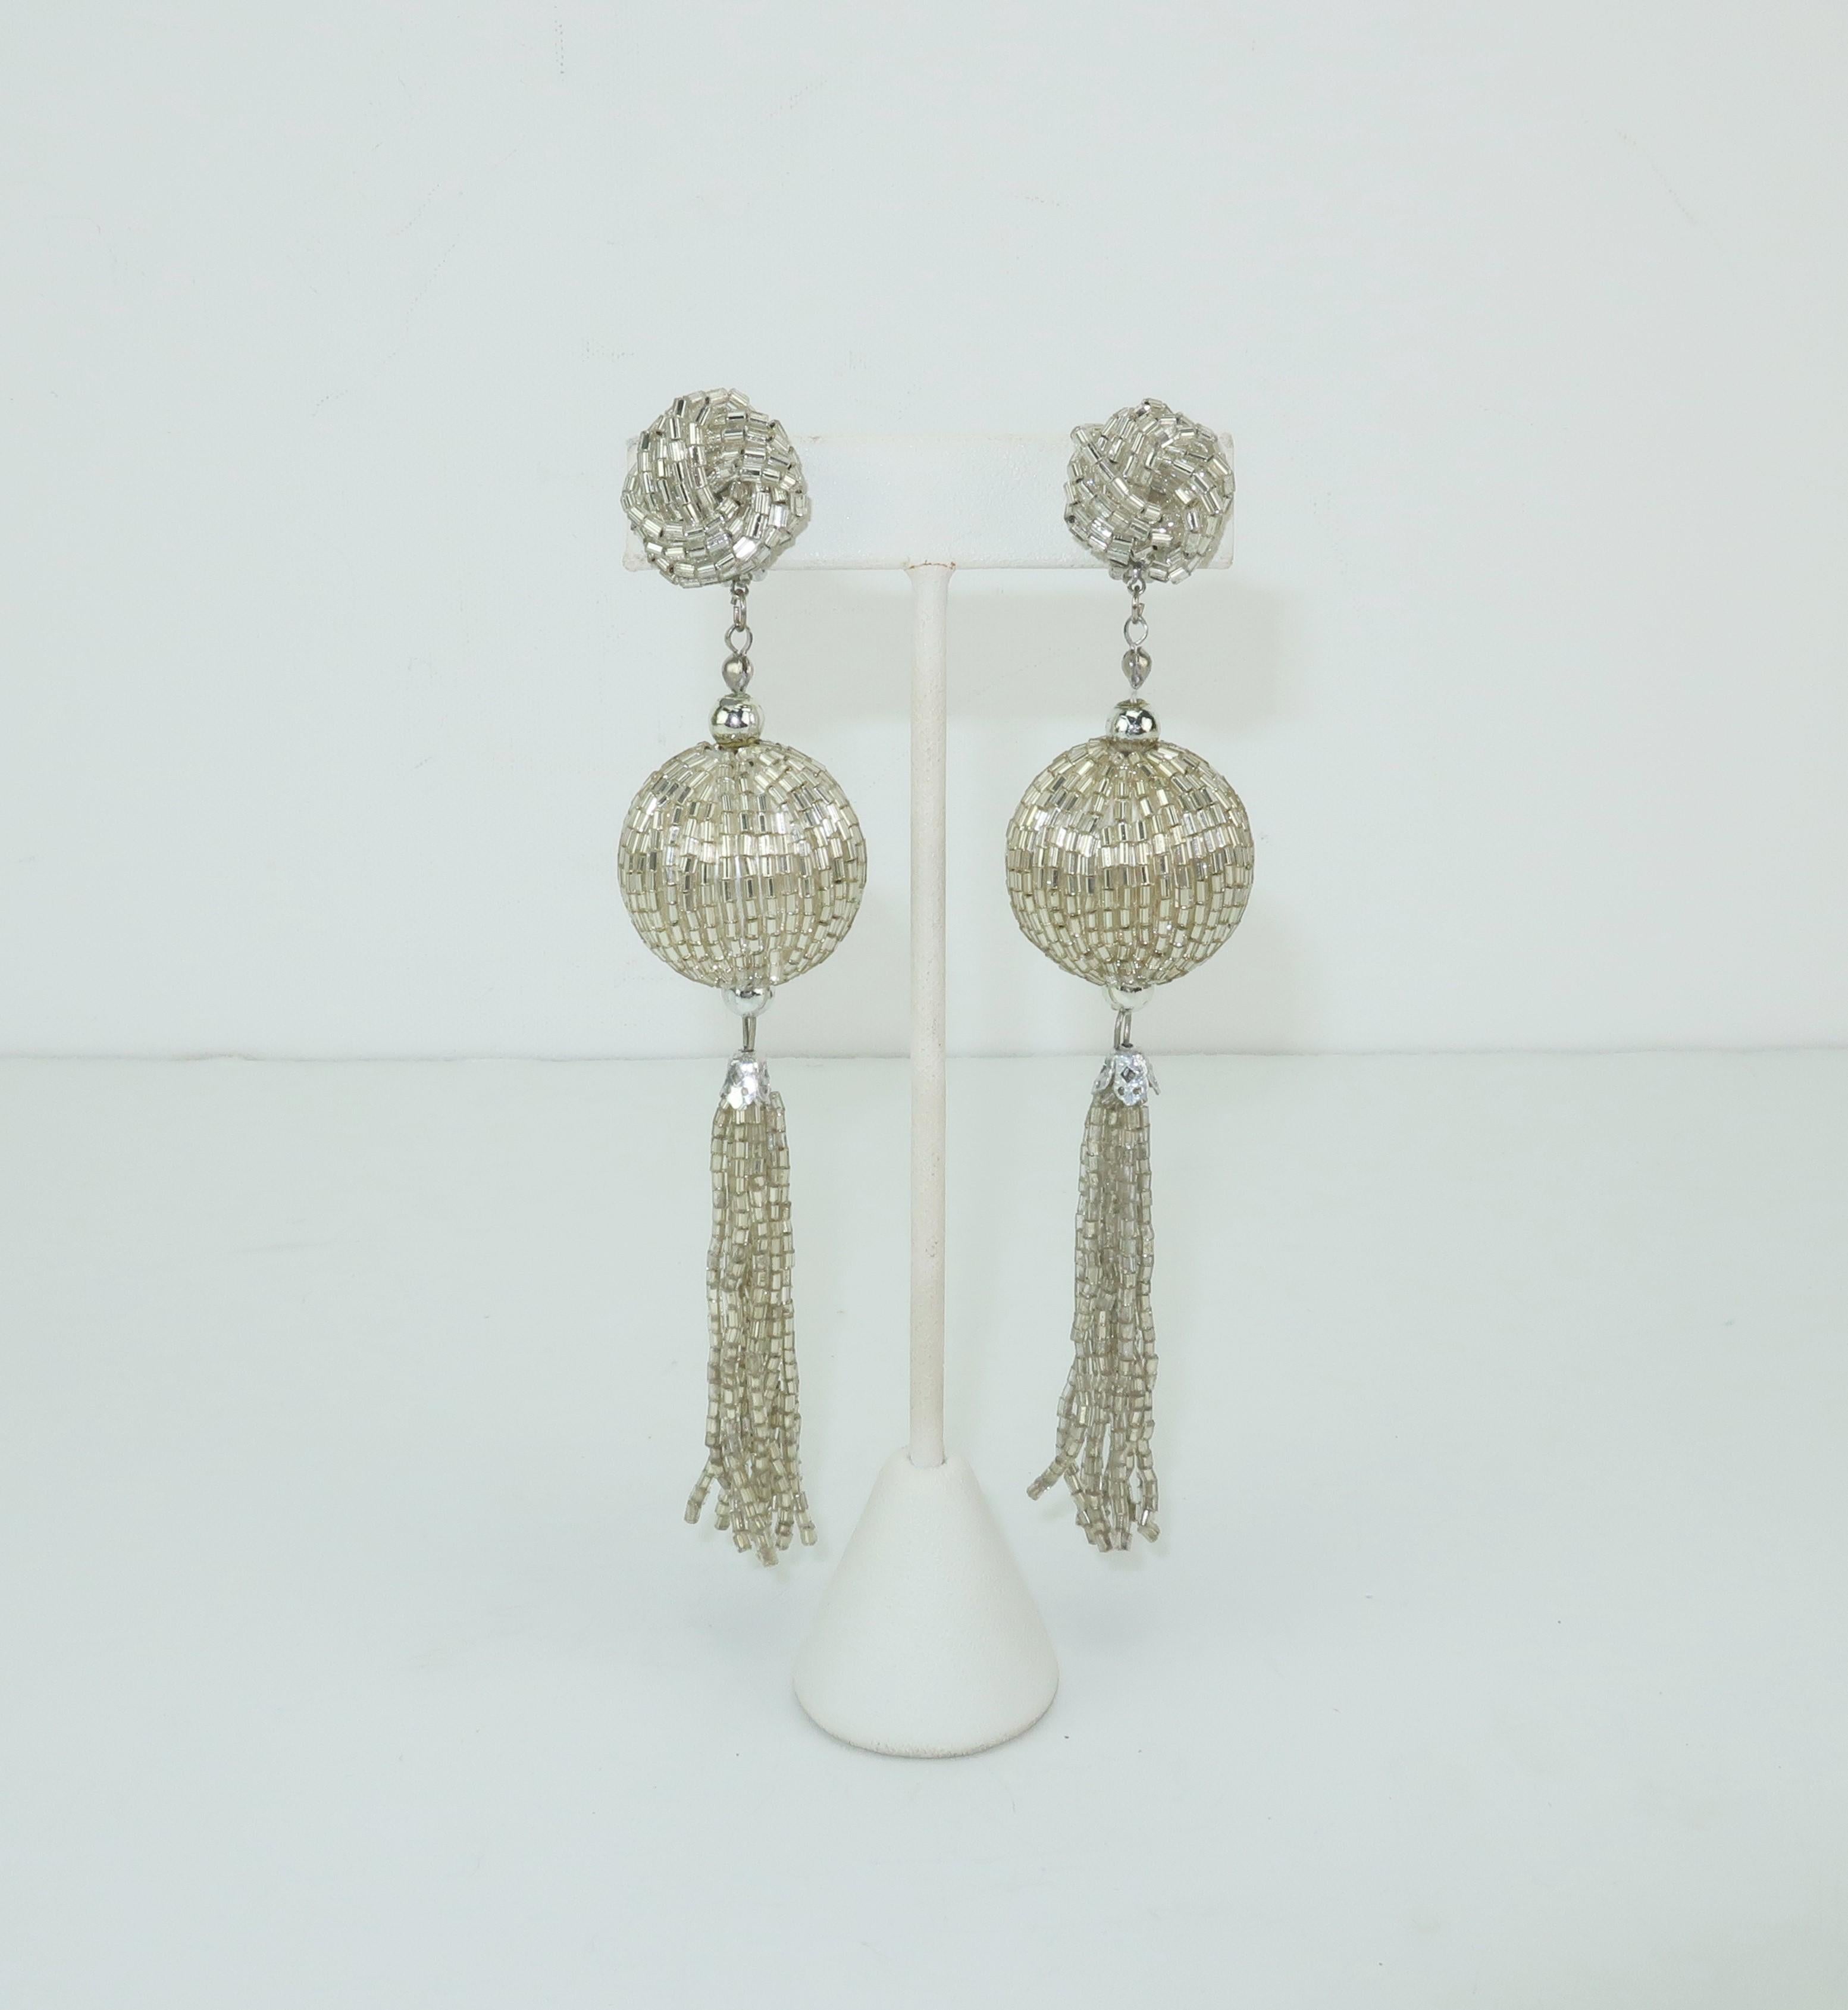 A disco diva's delight!  These 1970's clip on earrings are fully covered in silver beads and feature an articulated dangle in a tassel style silhouette.  Lightweight enough for all evening wear and big enough to make a statement.  Unsigned and in